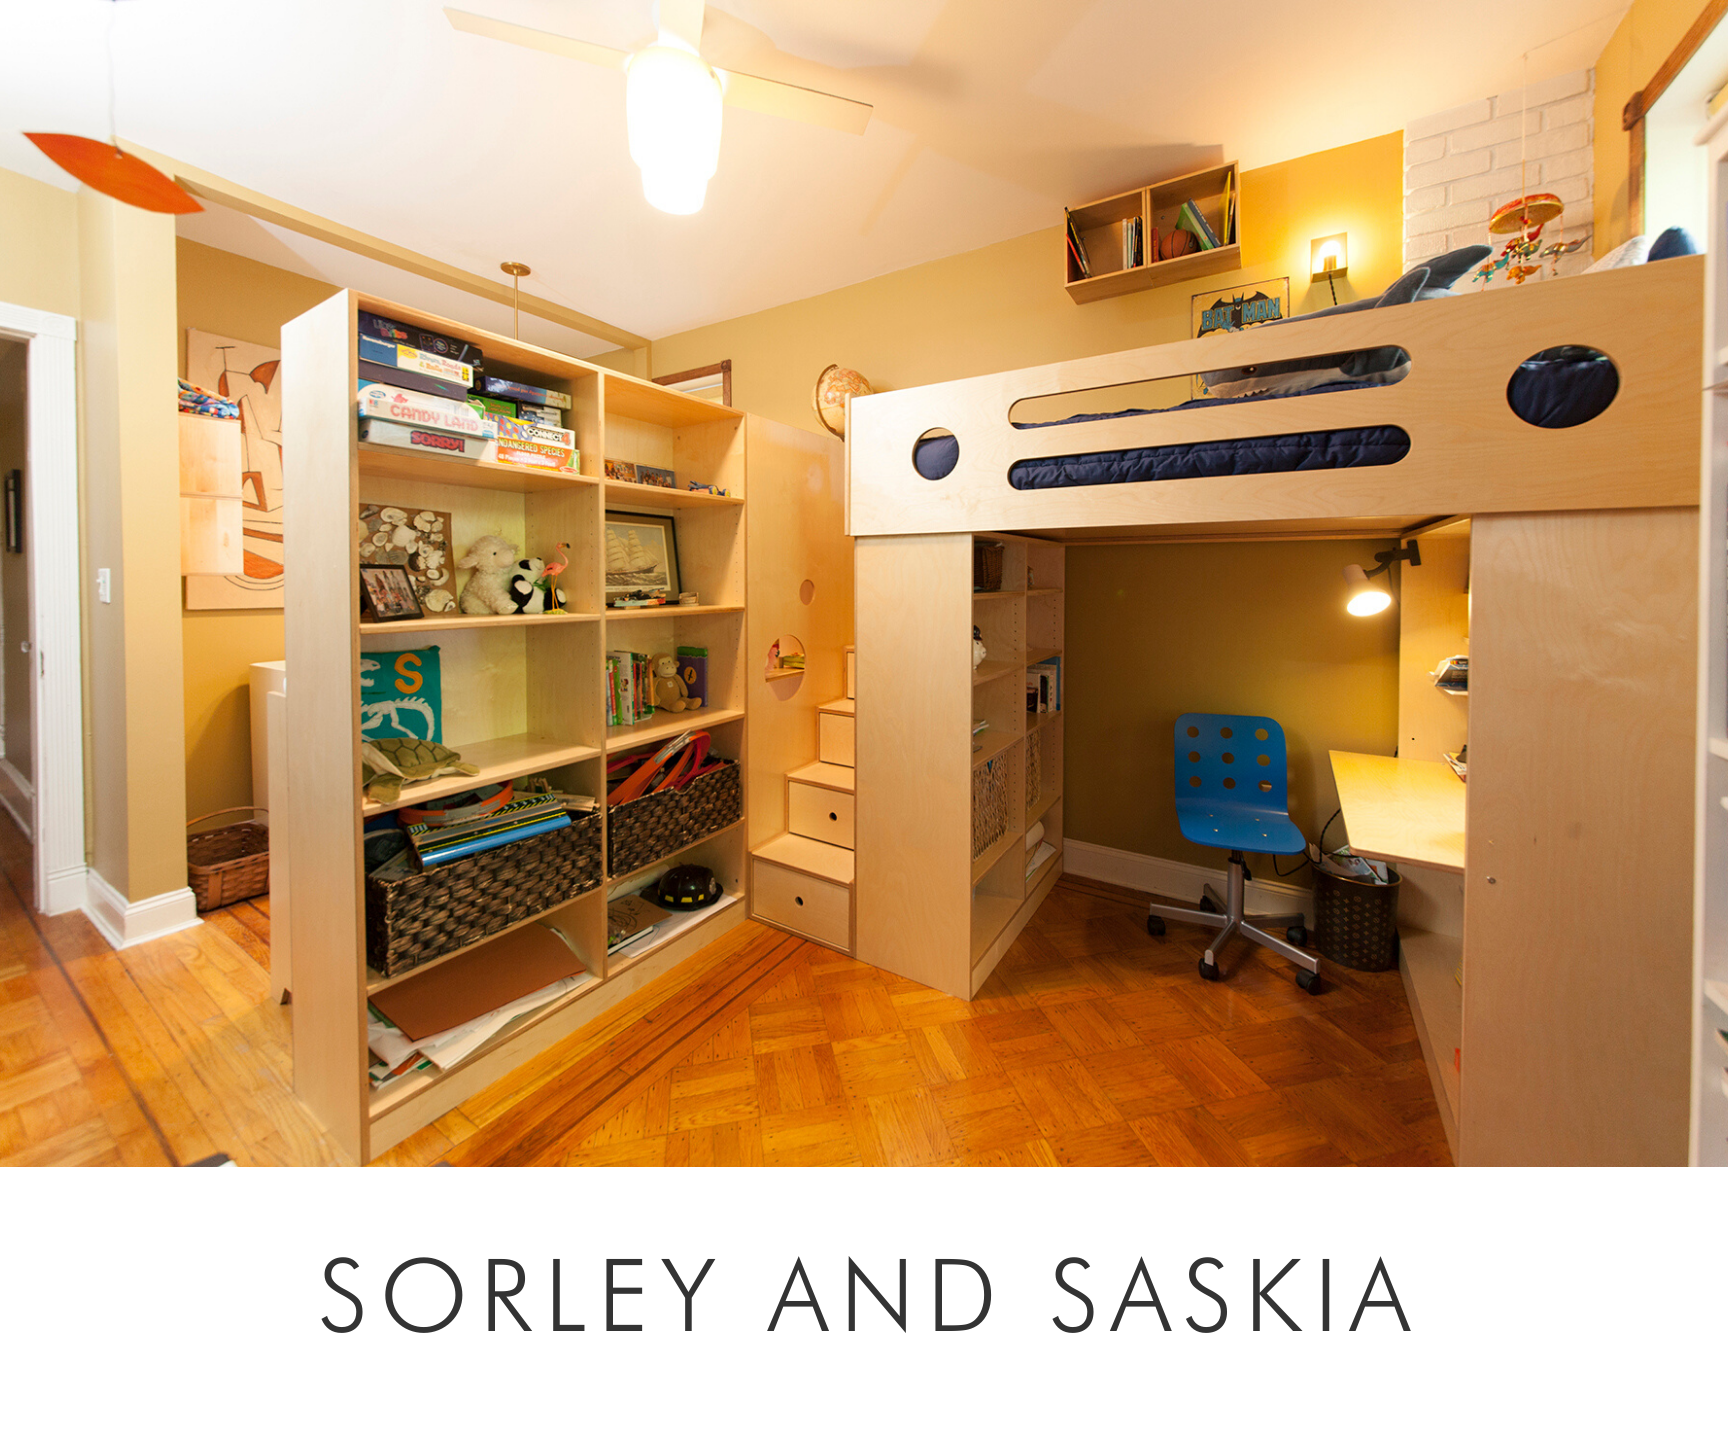 Bunk bed, desk, and shelves in ‘SORLEY AND SASKIA’ room.